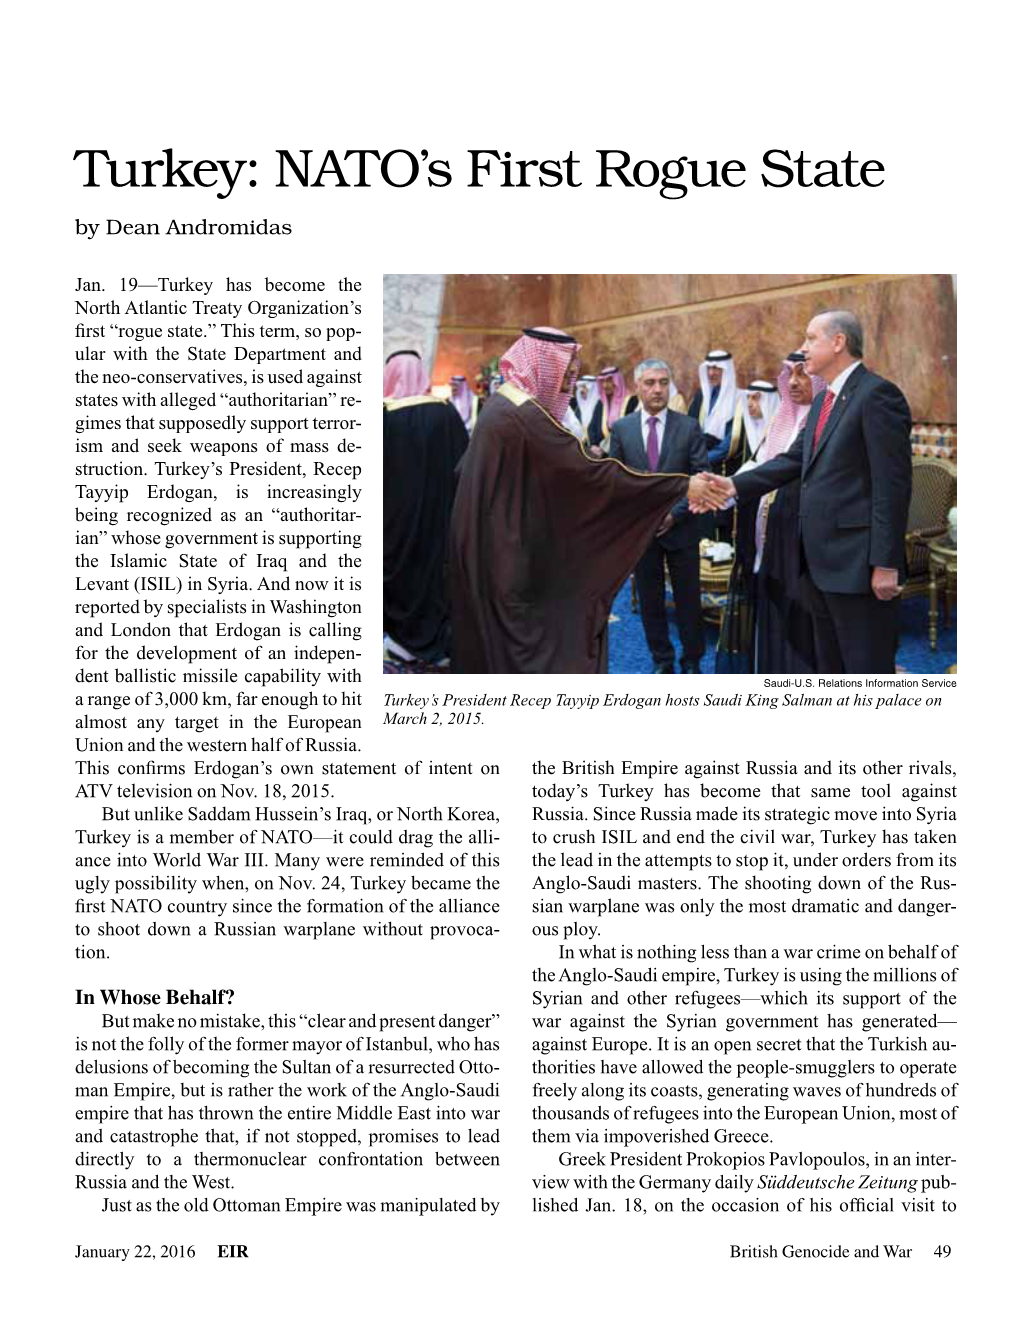 Turkey: NATO’S First Rogue State by Dean Andromidas